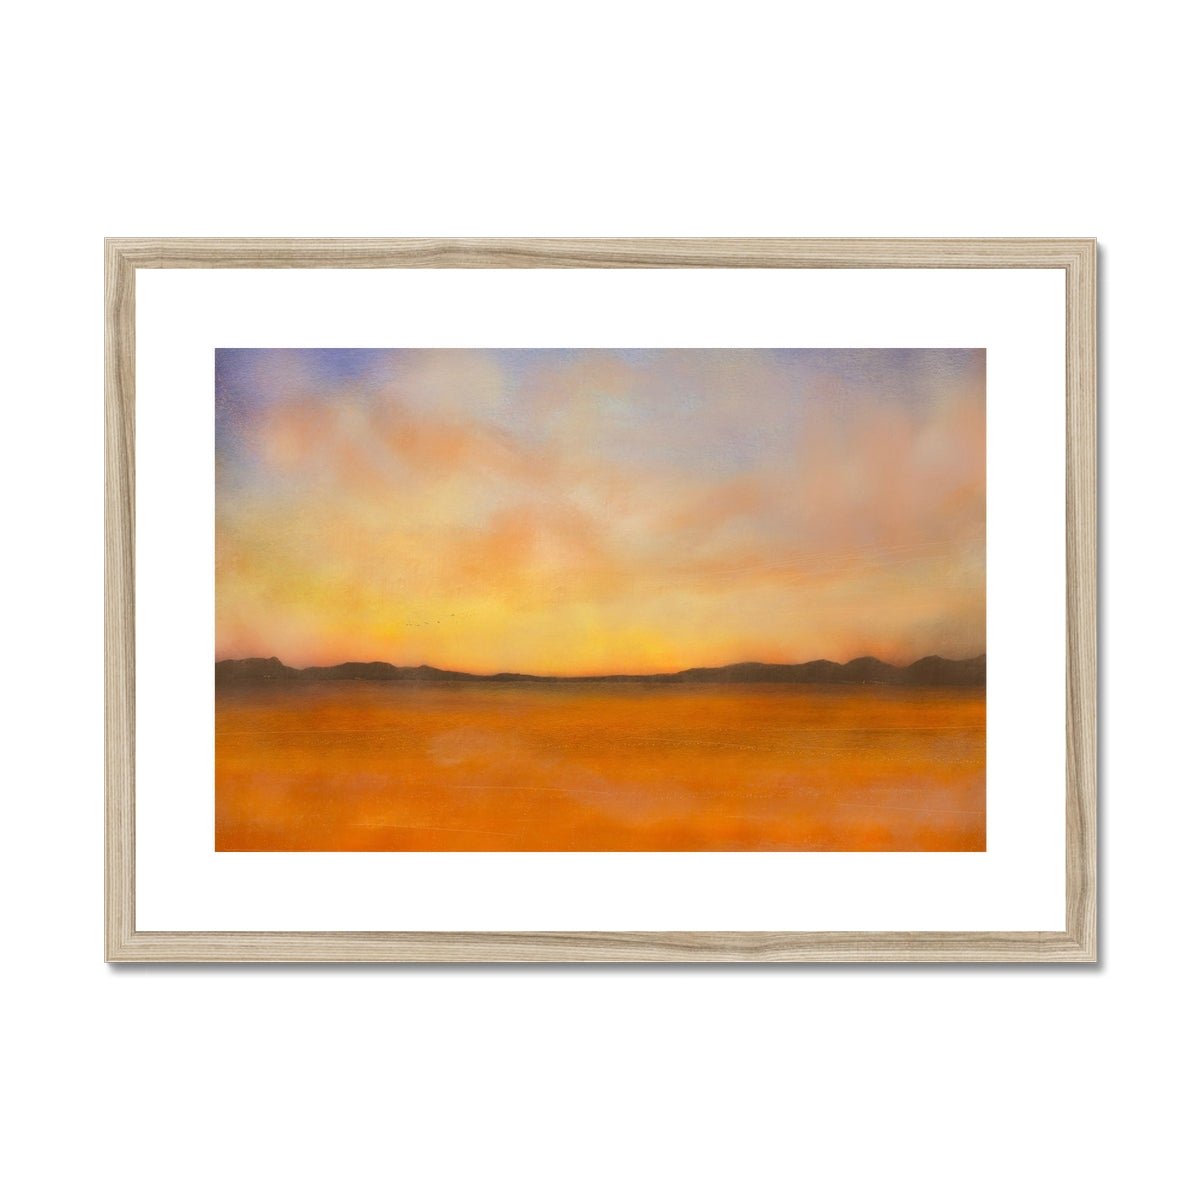 Islay Dawn Painting | Framed & Mounted Prints From Scotland-Framed & Mounted Prints-Hebridean Islands Art Gallery-A2 Landscape-Natural Frame-Paintings, Prints, Homeware, Art Gifts From Scotland By Scottish Artist Kevin Hunter